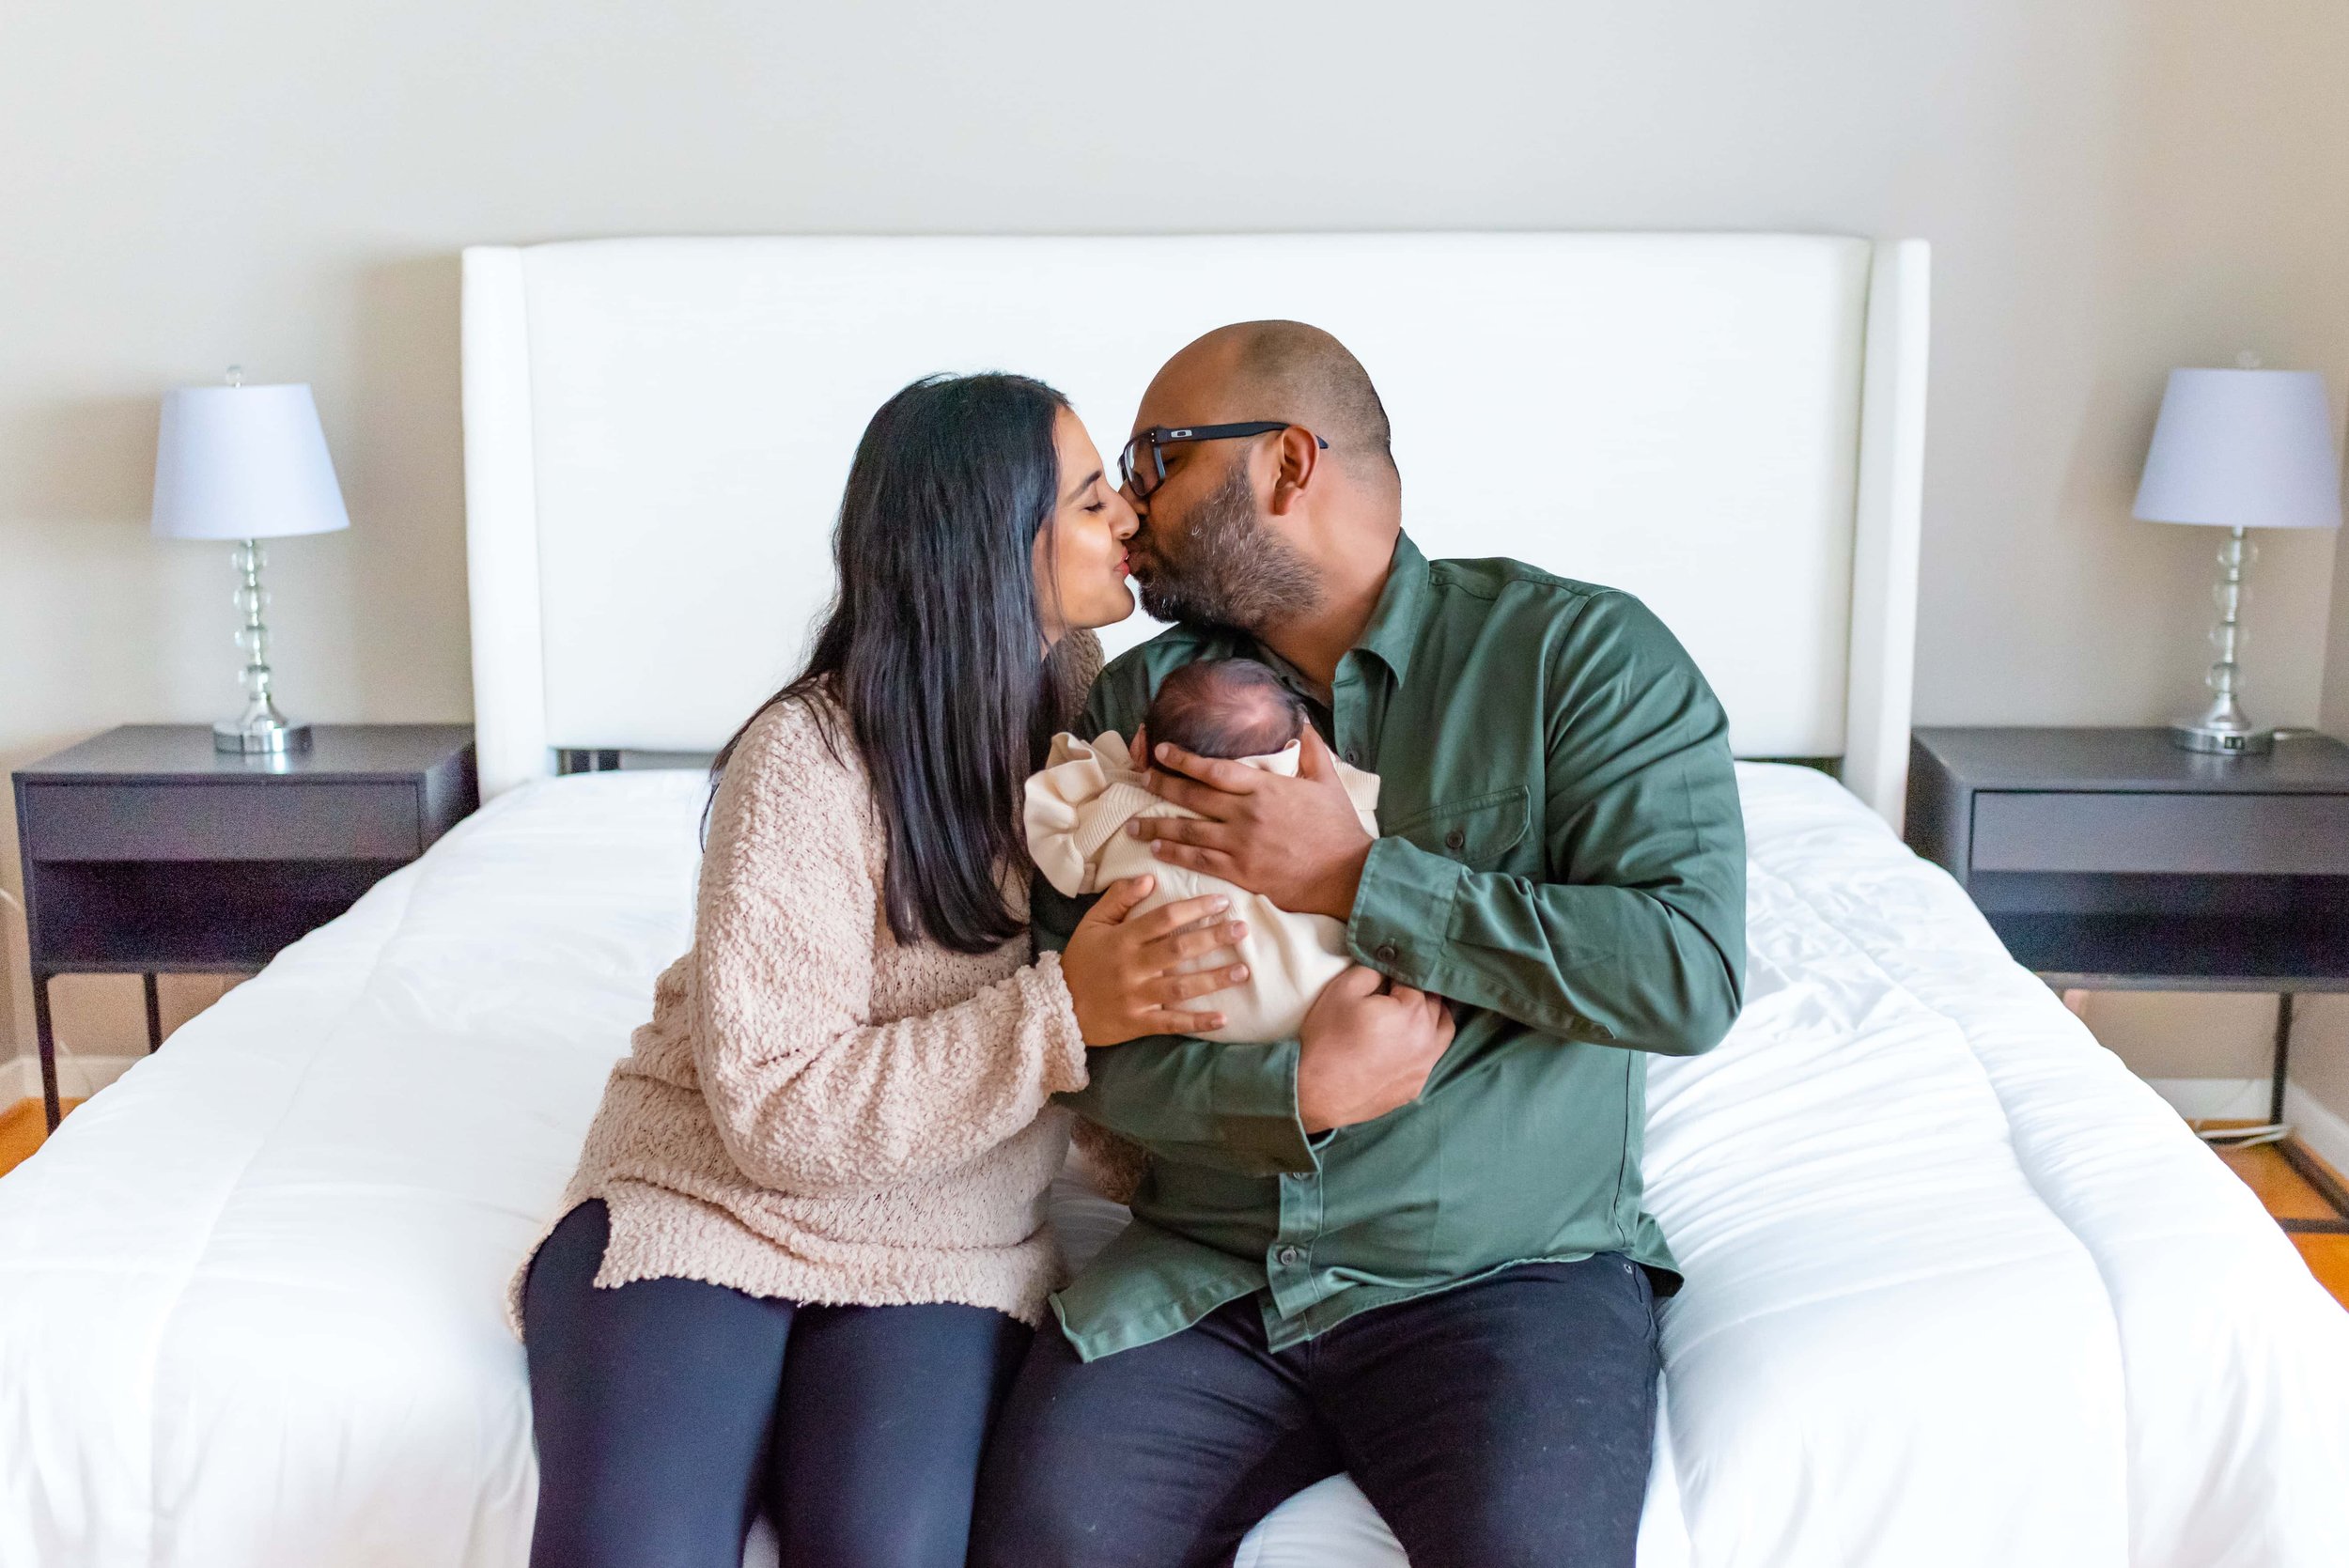 Newborn photography session - mom and dad kissing